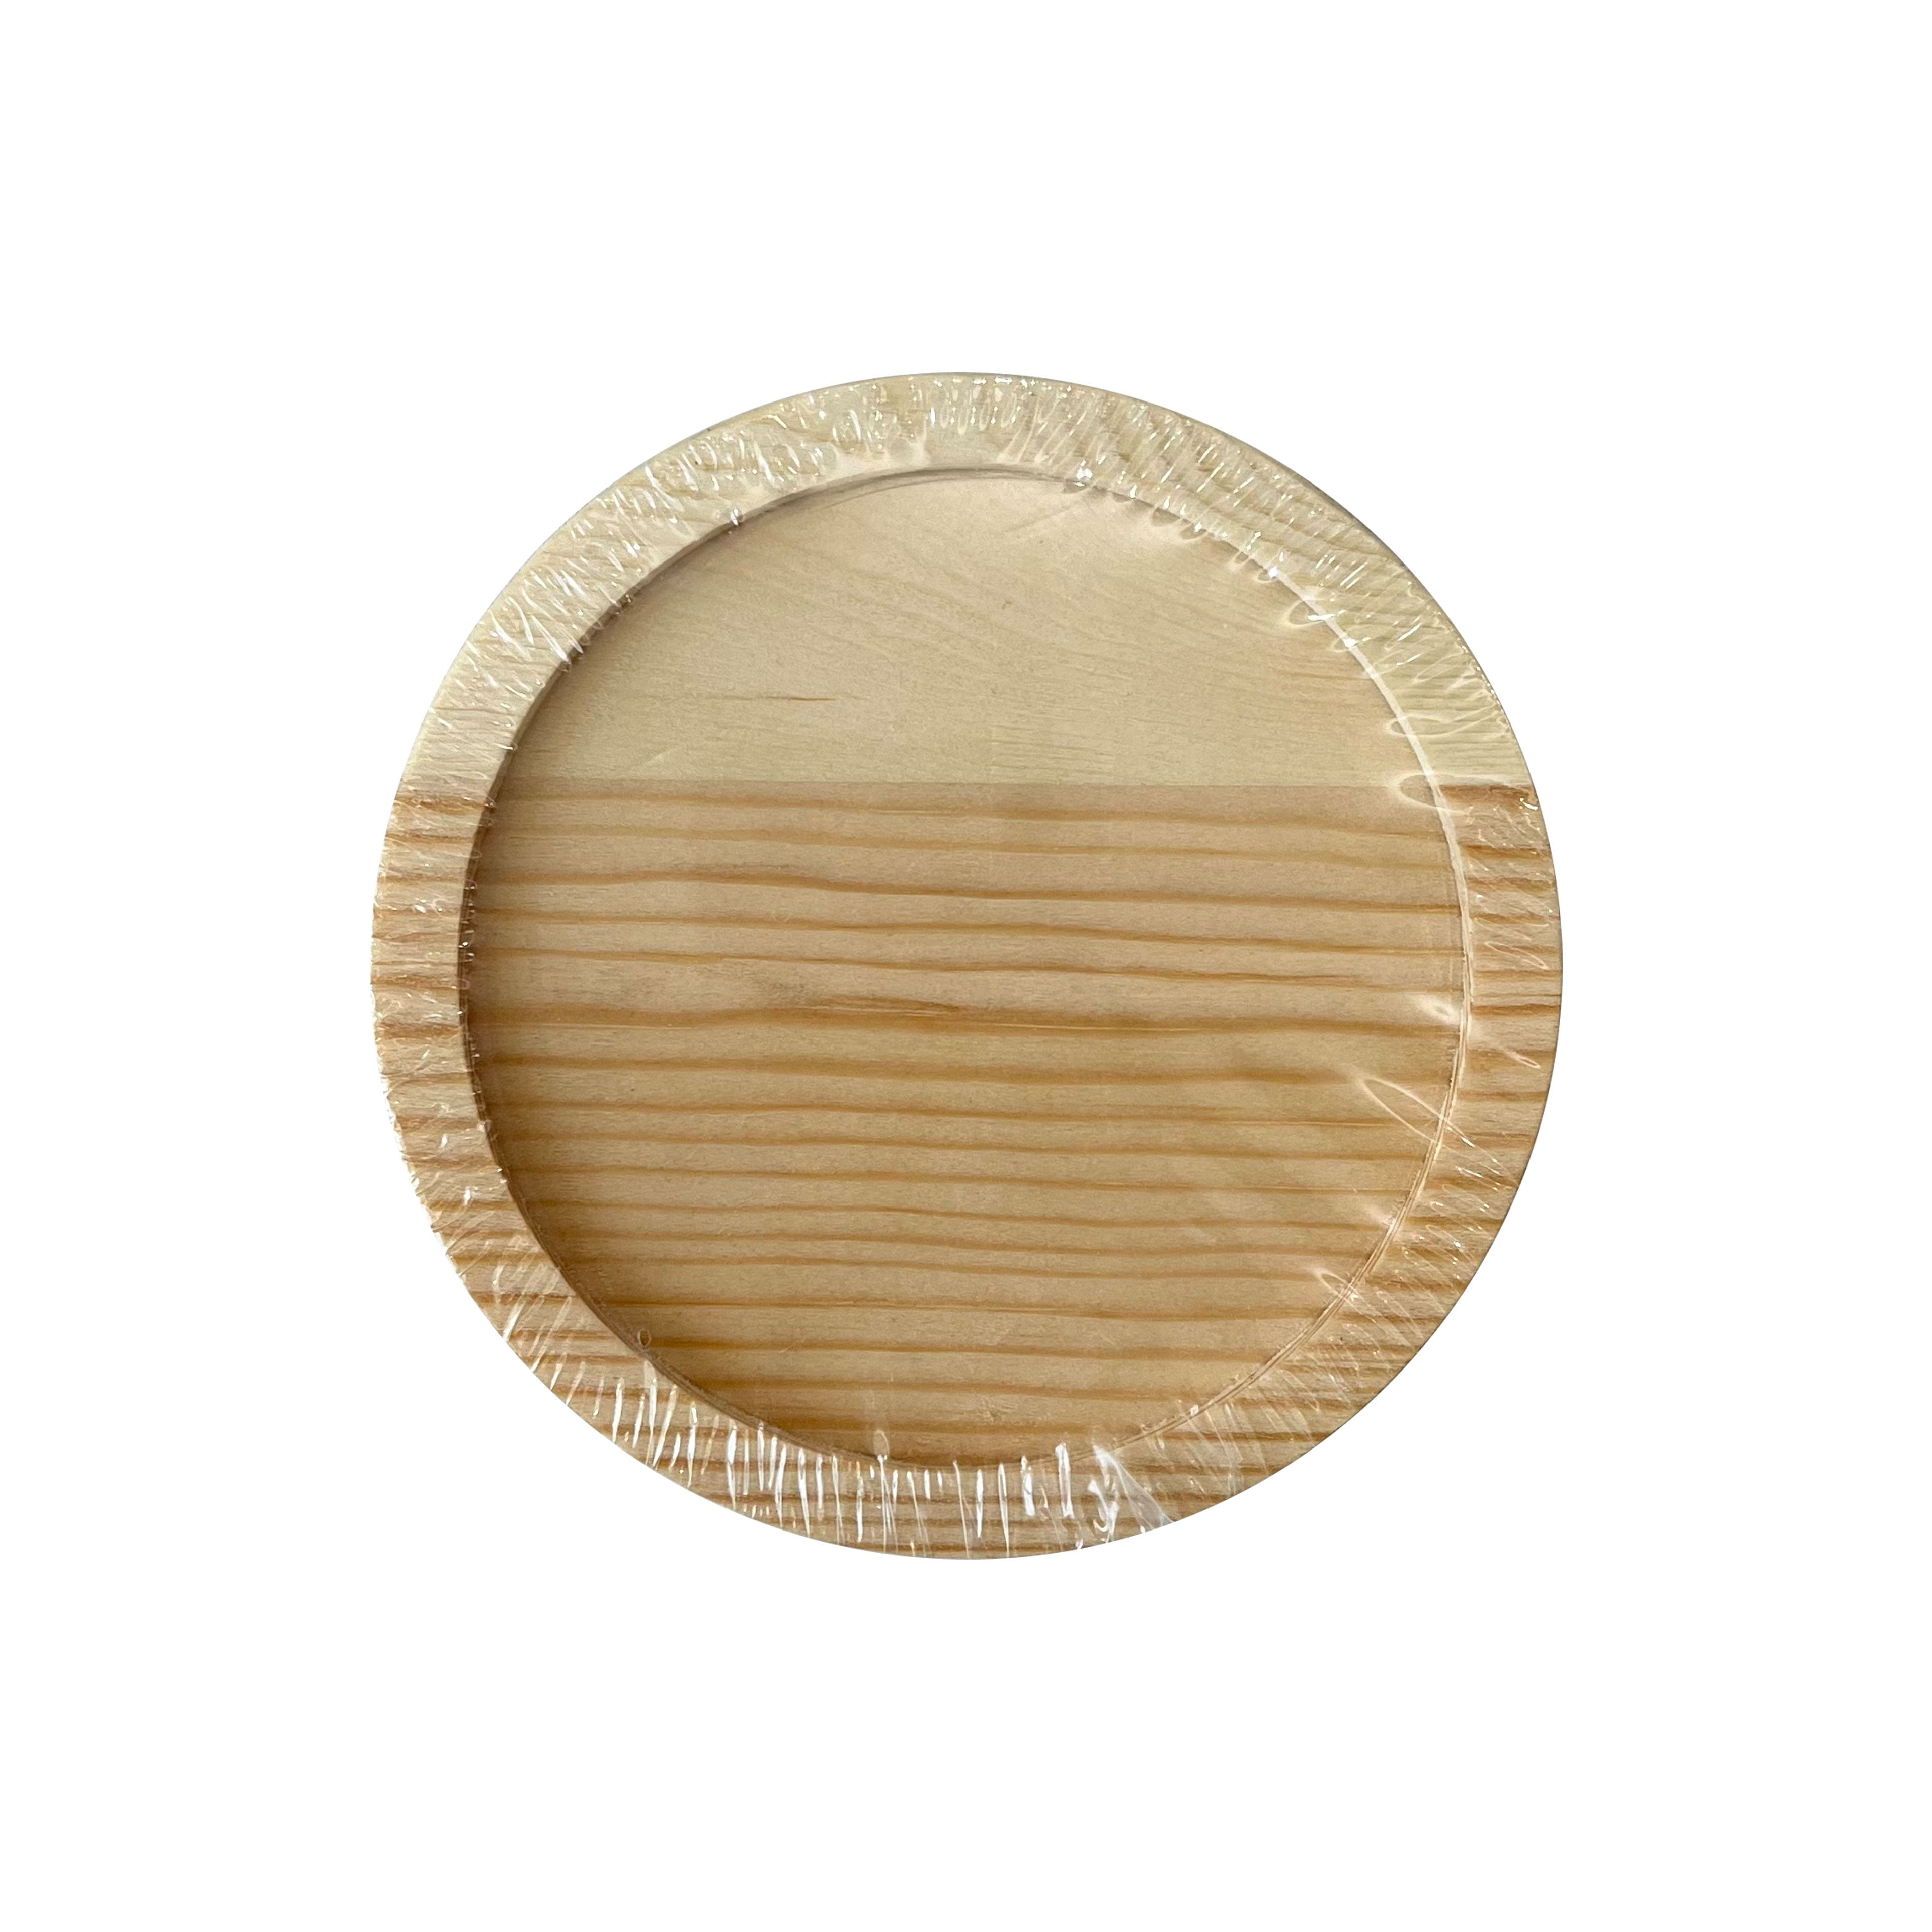 12 Packs: 4 ct. (48 total) Round Welled Pinewood Coasters by Make Market&#xAE;